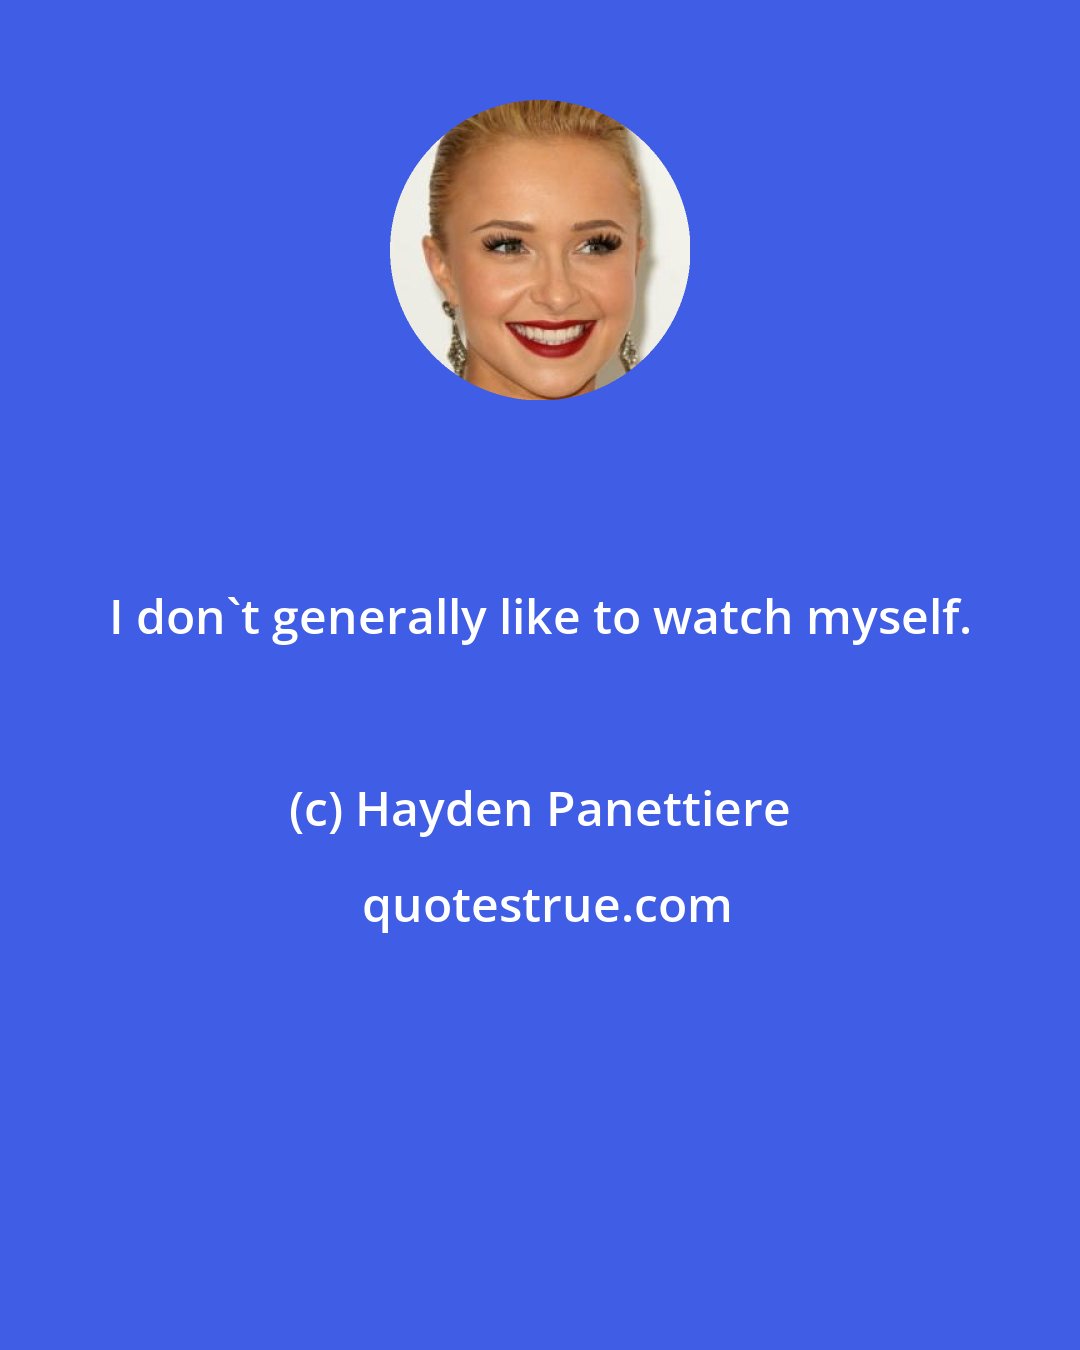 Hayden Panettiere: I don't generally like to watch myself.